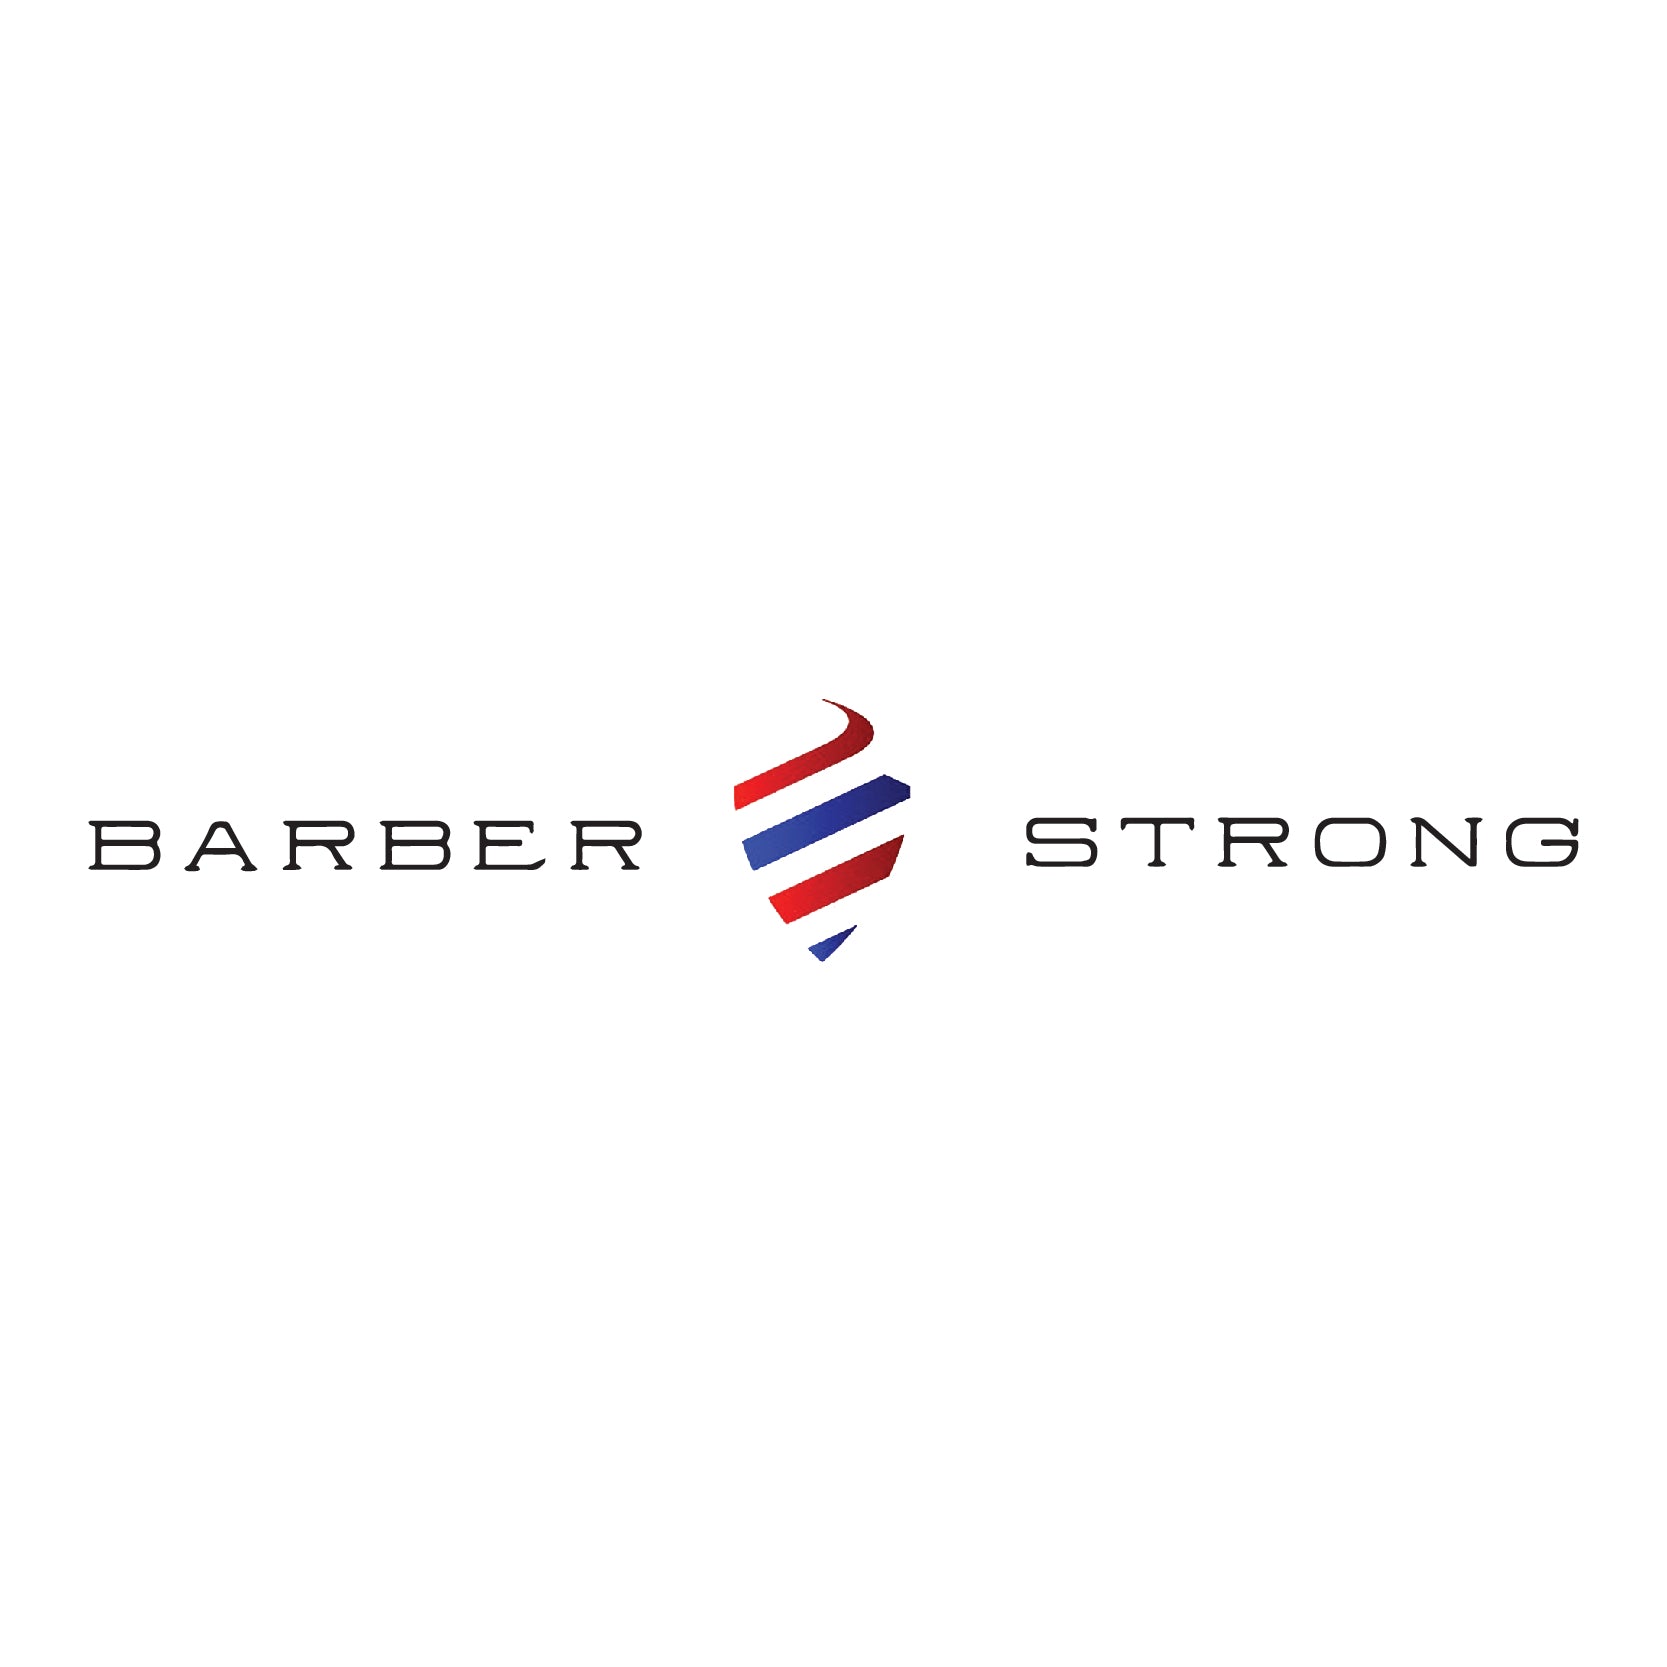 Barber Strong